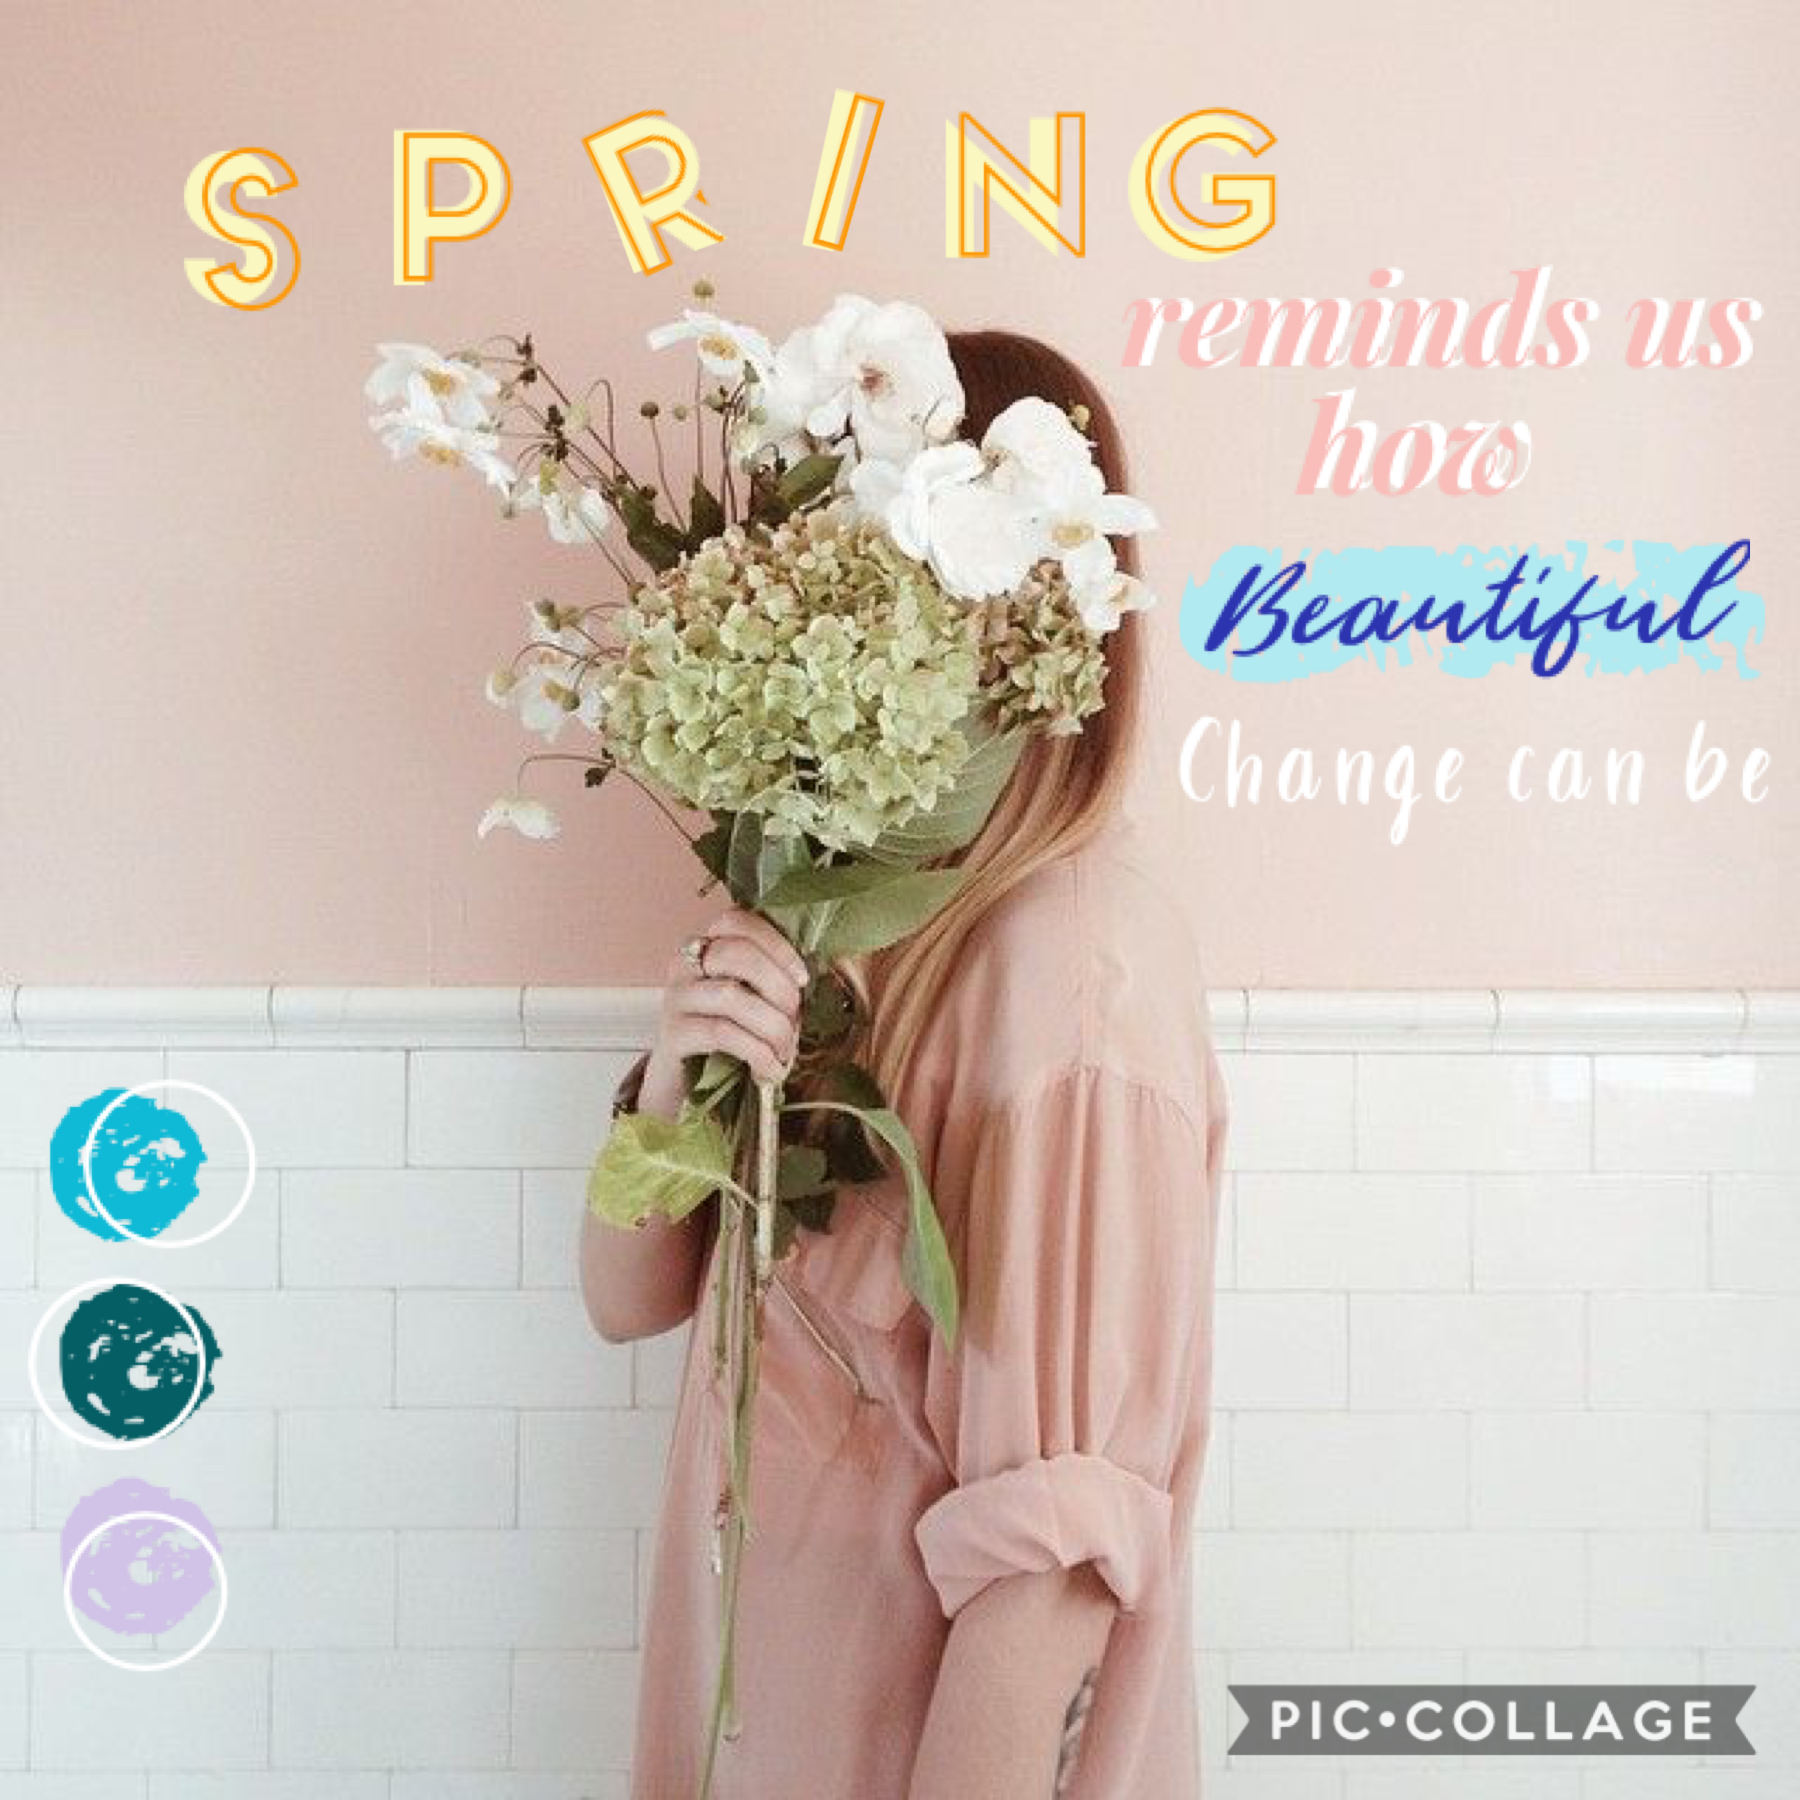 🌸Tap🌸

Made this for the spring contest! Mixed feelings about this... rate from 1-10?